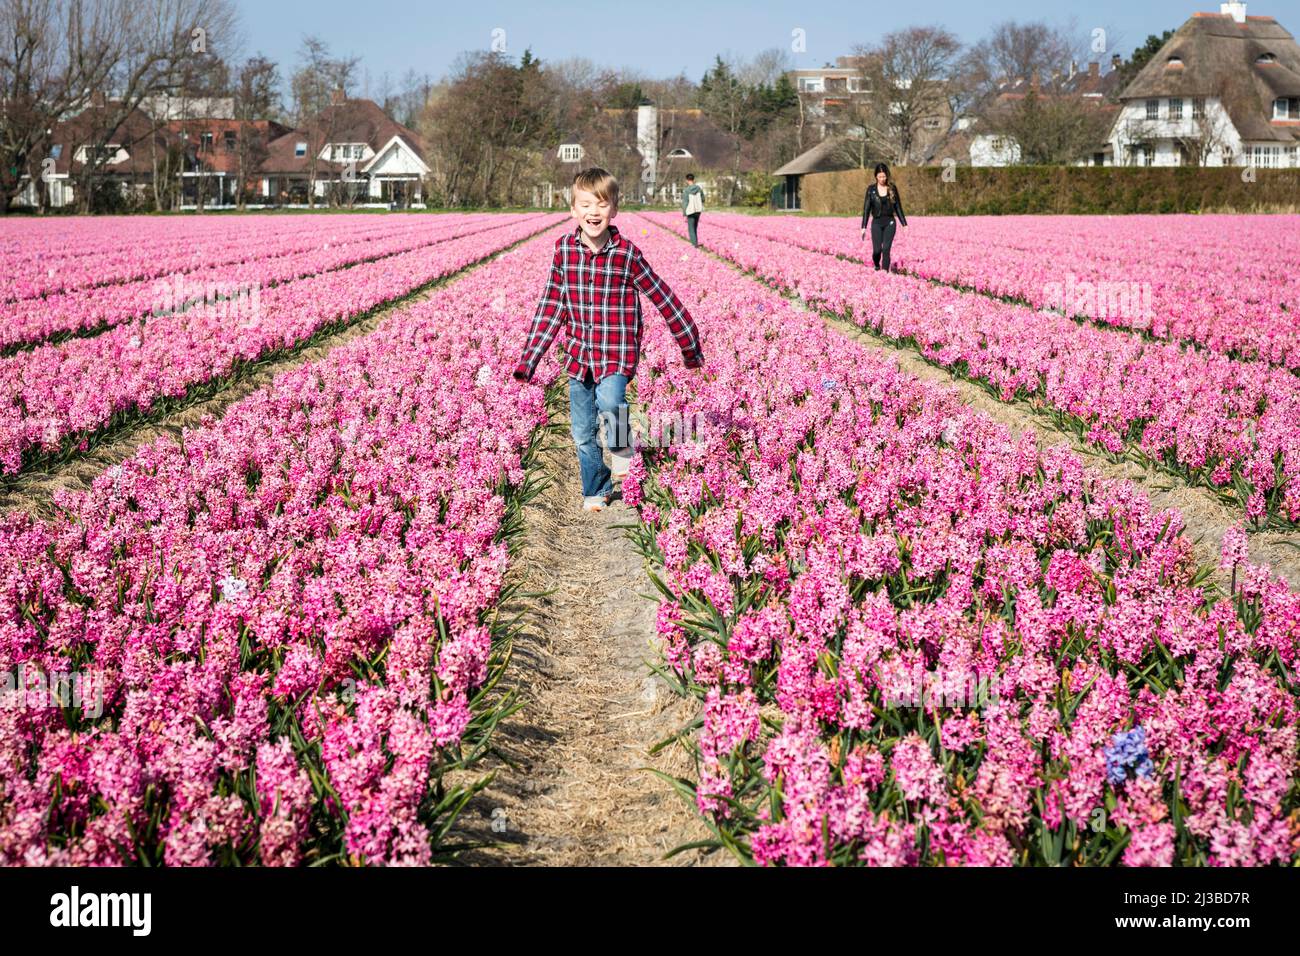 A young boy runs between rows of Hyacinths (Hyacinthus Orientalis), with buildings in the background, on an early Spring day in the Dutch flower fields around Lisse in the Netherlands. Stock Photo